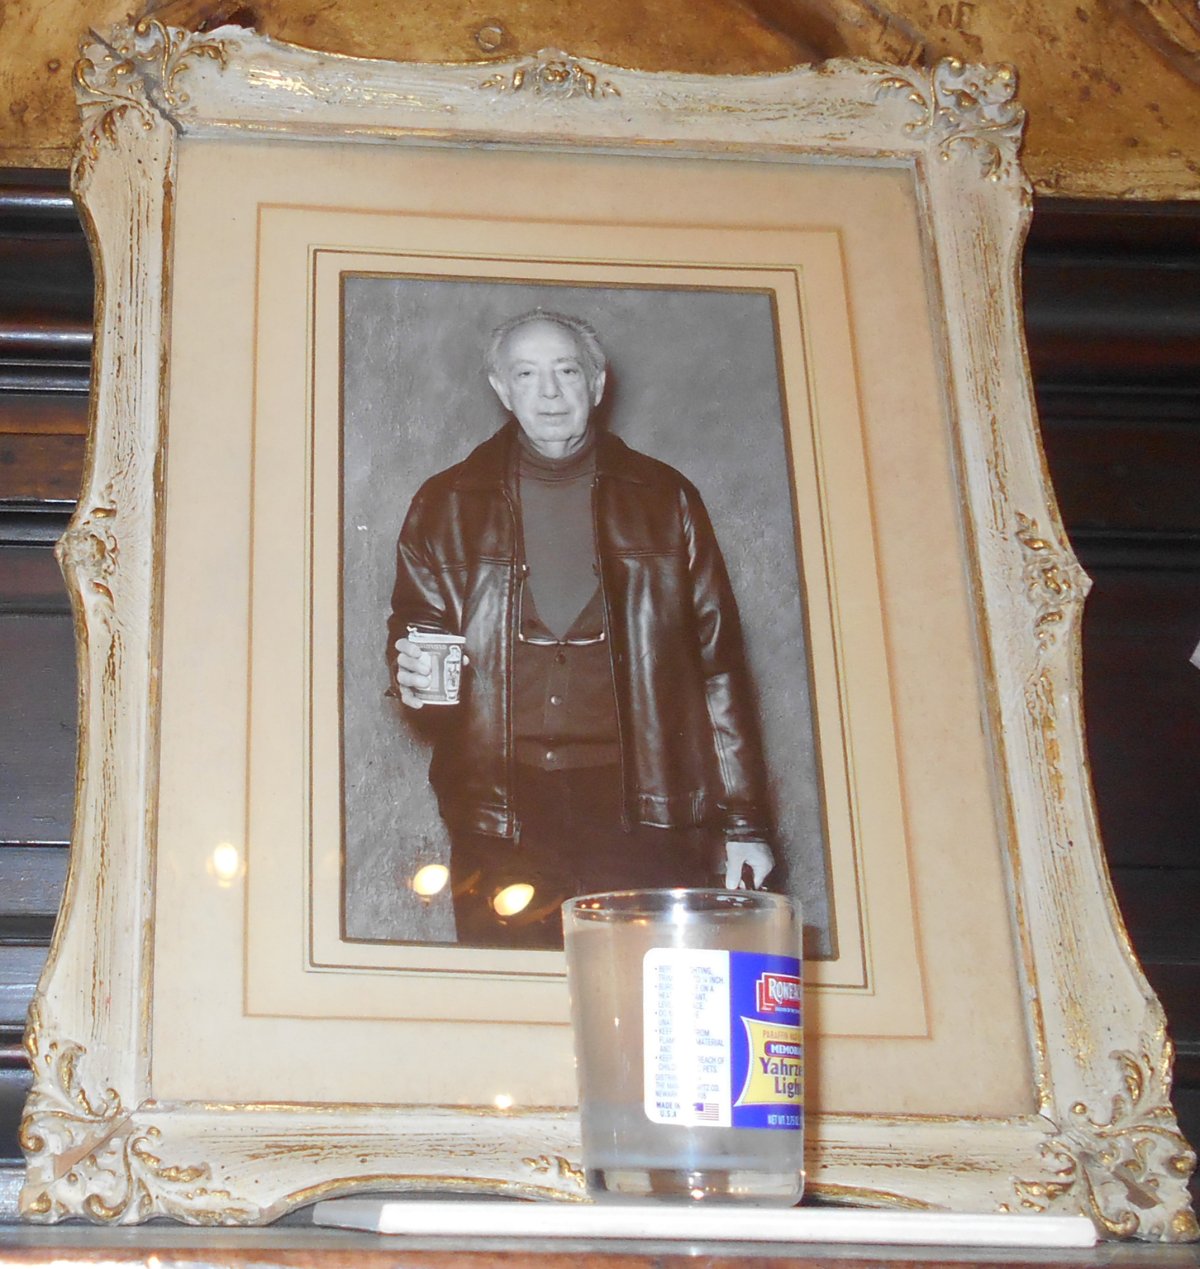 A photo of Stanley Bard, The Chelsea Hotel’s former owner, and memorial candle that were left atop the hotel lobby’s fireplace after he died last month. Photo by Mary Reinholz